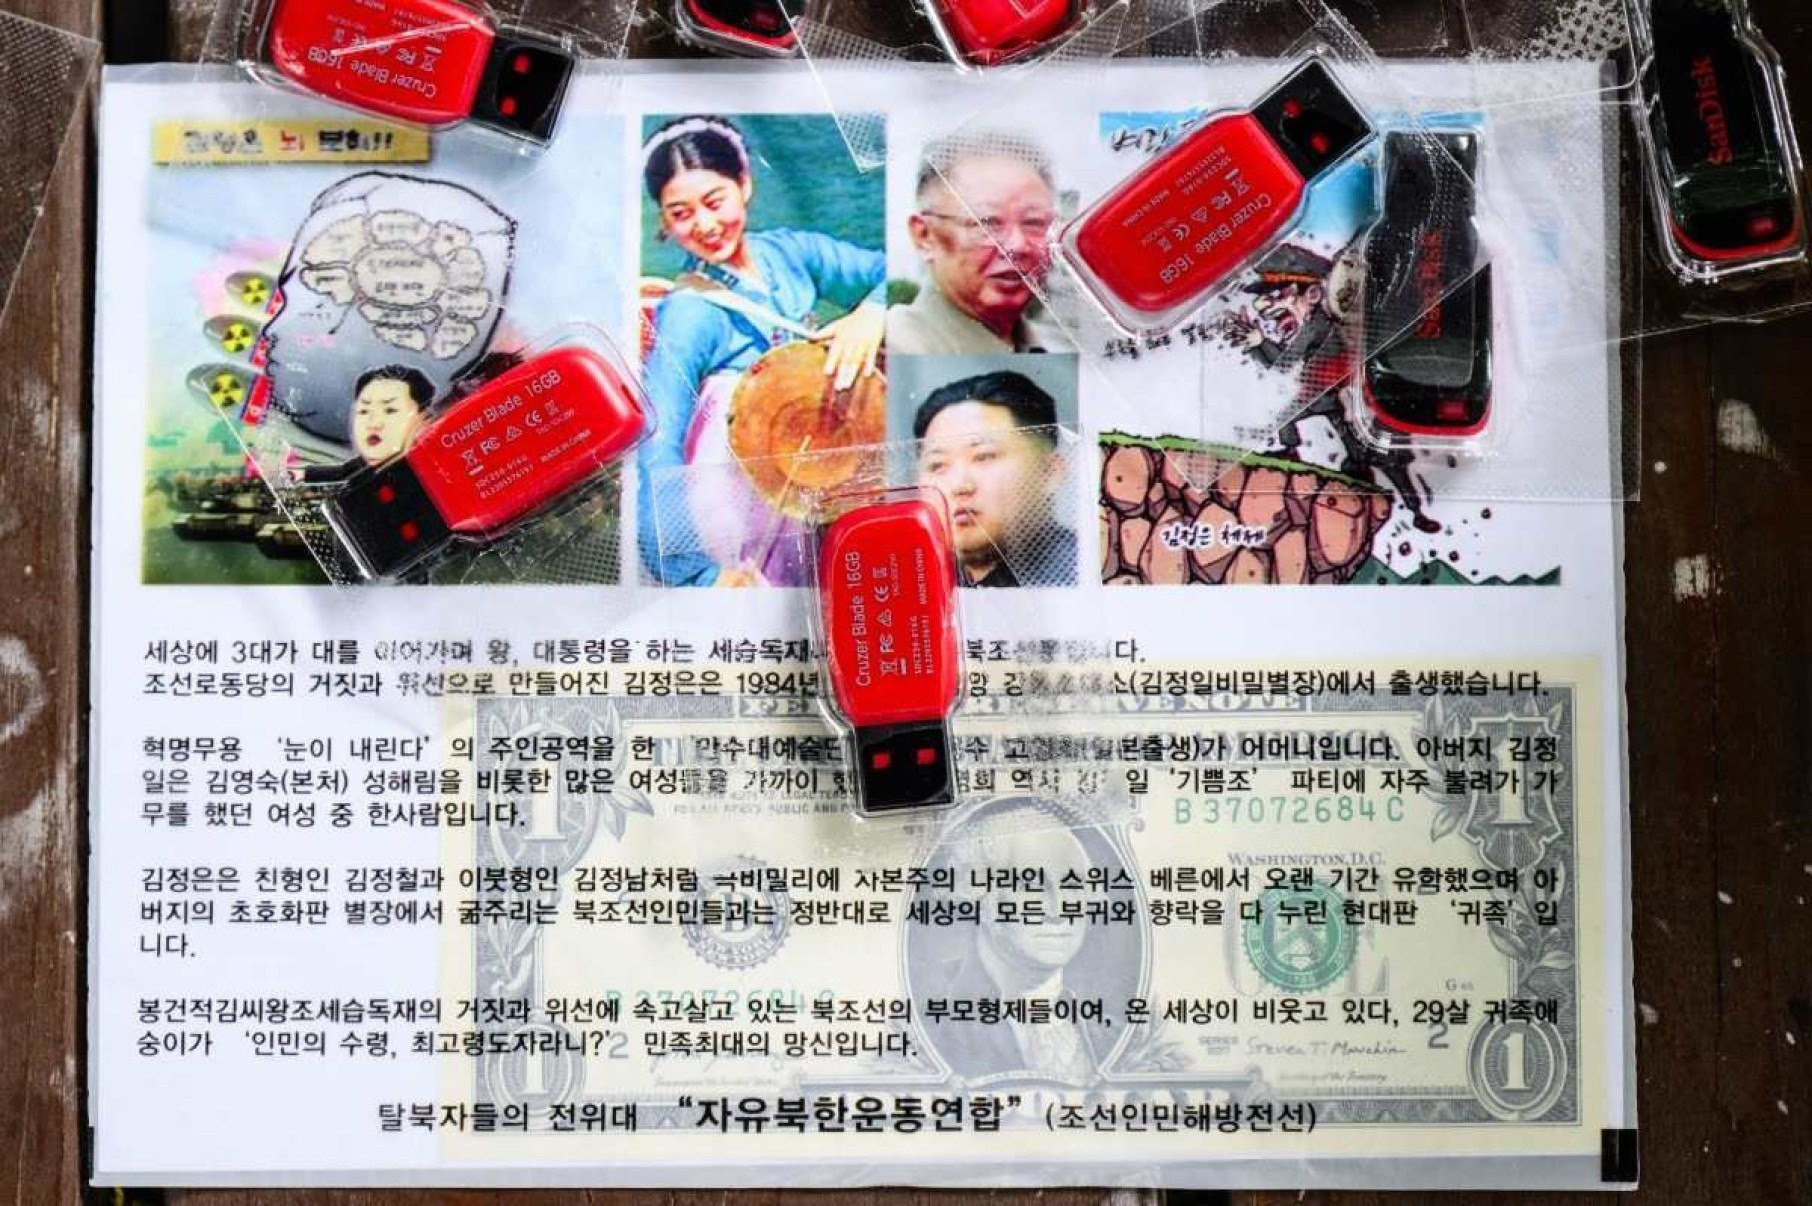  A leaflet containing a US dollar bill, under USB-drives of K-pop is seen during an AFP interview with North Korean defector Park Sang-hak in Seoul on June 25, 2024. Park considers the propaganda balloons he floats into his homeland to be part of a tradition of psychological warfare, and vows to keep going until Kim Jong Un's regime falls. The son of a North Korean double agent who escaped his country in 1999, Park has been sending balloons loaded with anti-regime propaganda leaflets, US dollar bills and USB drives of K-pop across the border for nearly 20 years. (Photo by Anthony WALLACE / AFP) / To go with 'SKOREA-NKOREA-DIPLOMACY-CONFLICT, PROFILE' by Kang Jin-kyu and Cat Barton
      Caption 